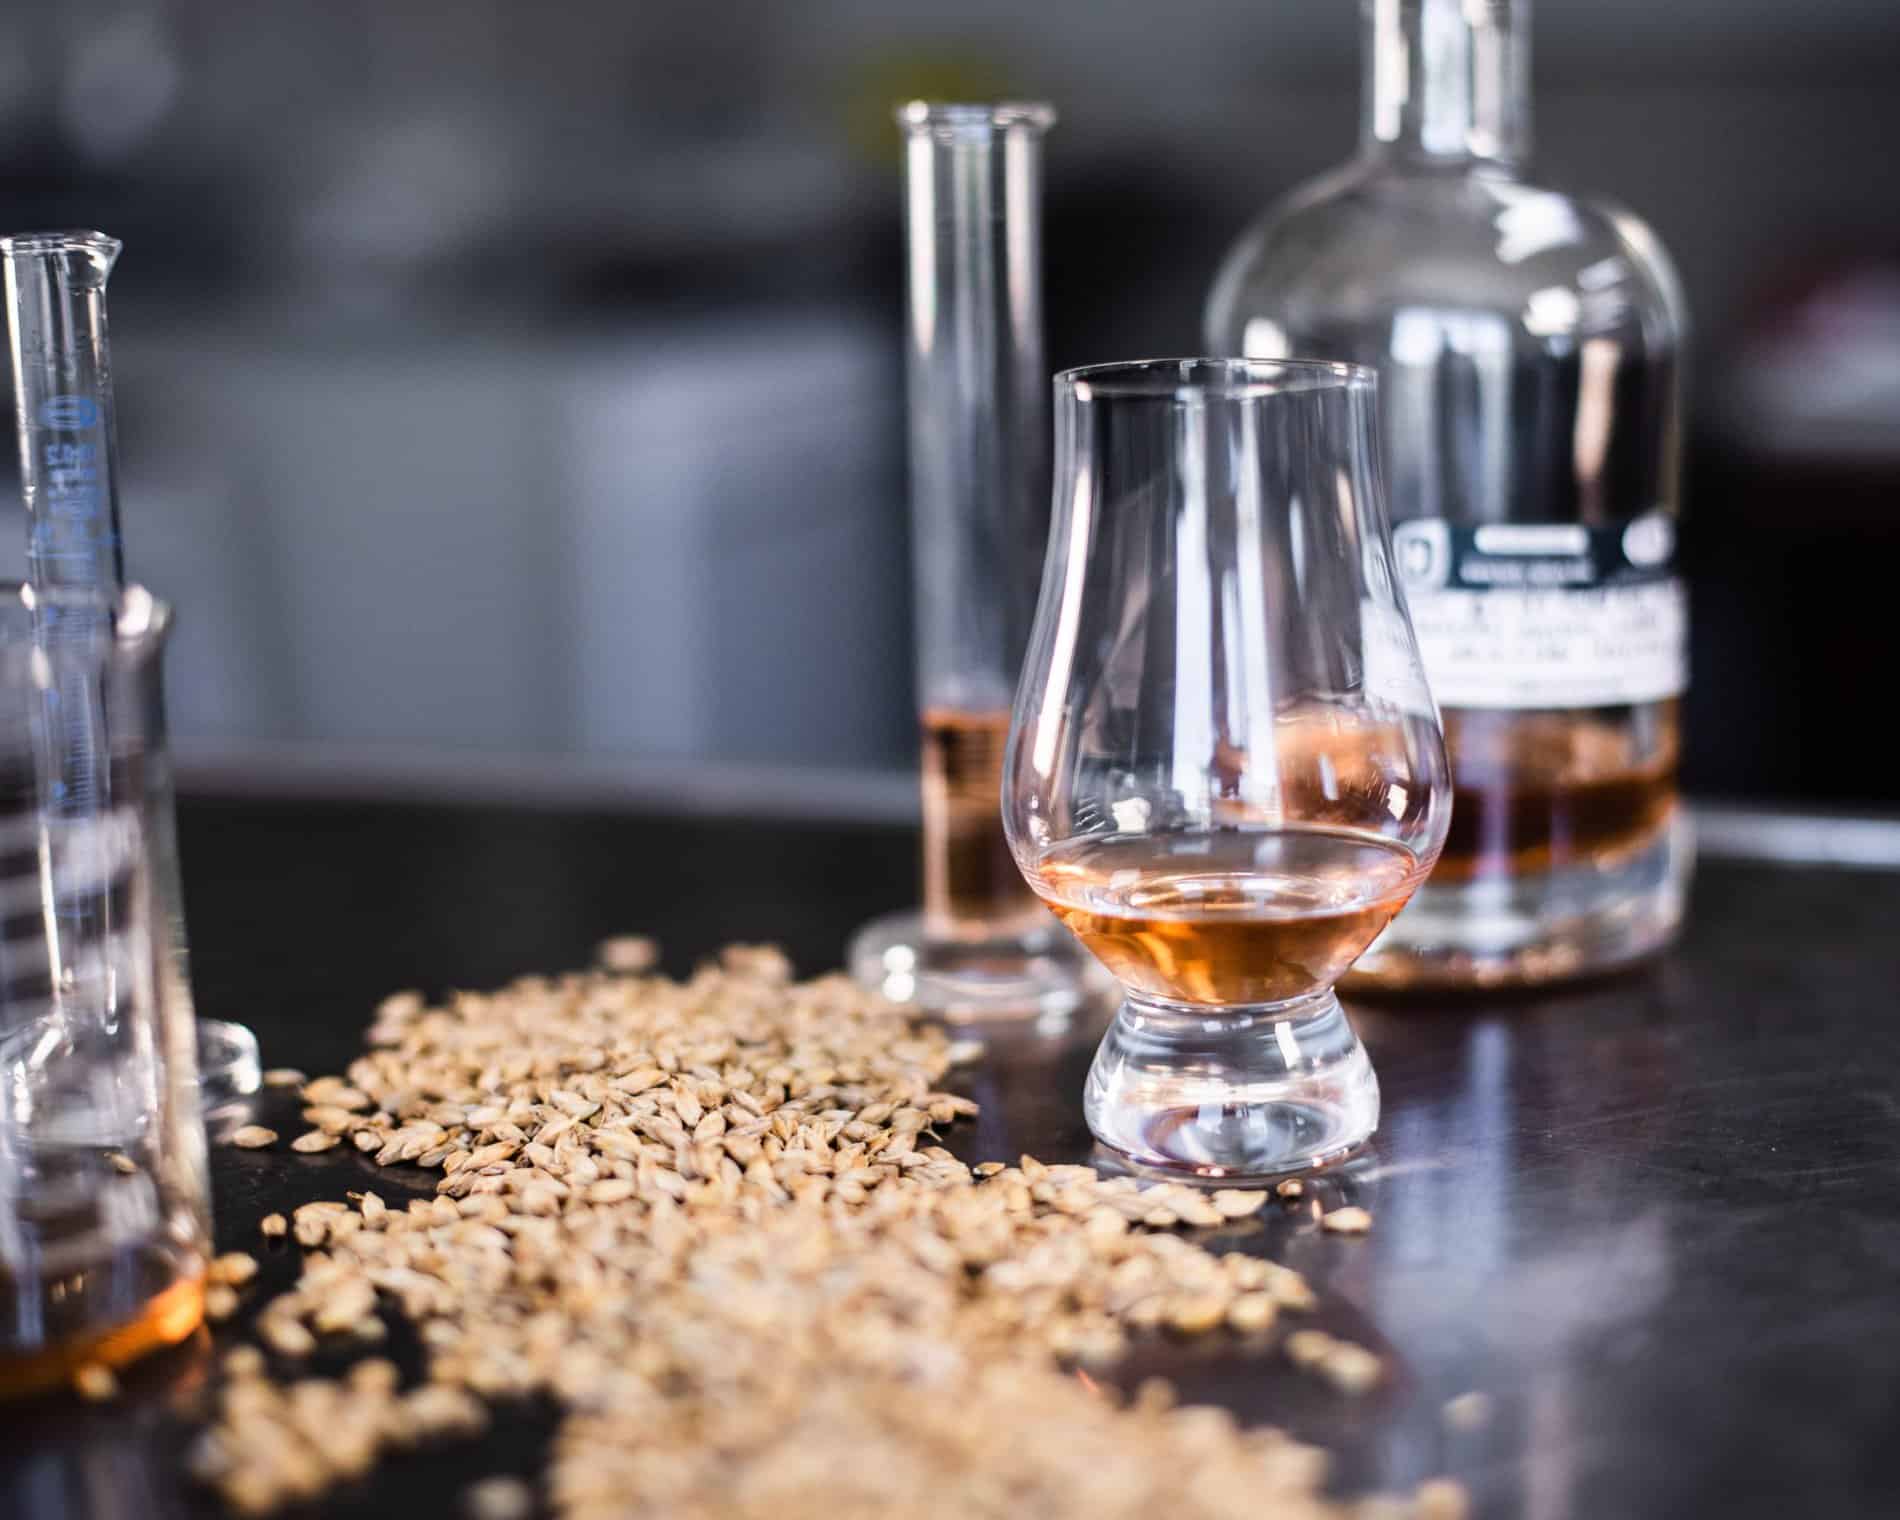 Saltire Executive whisky tasting experience